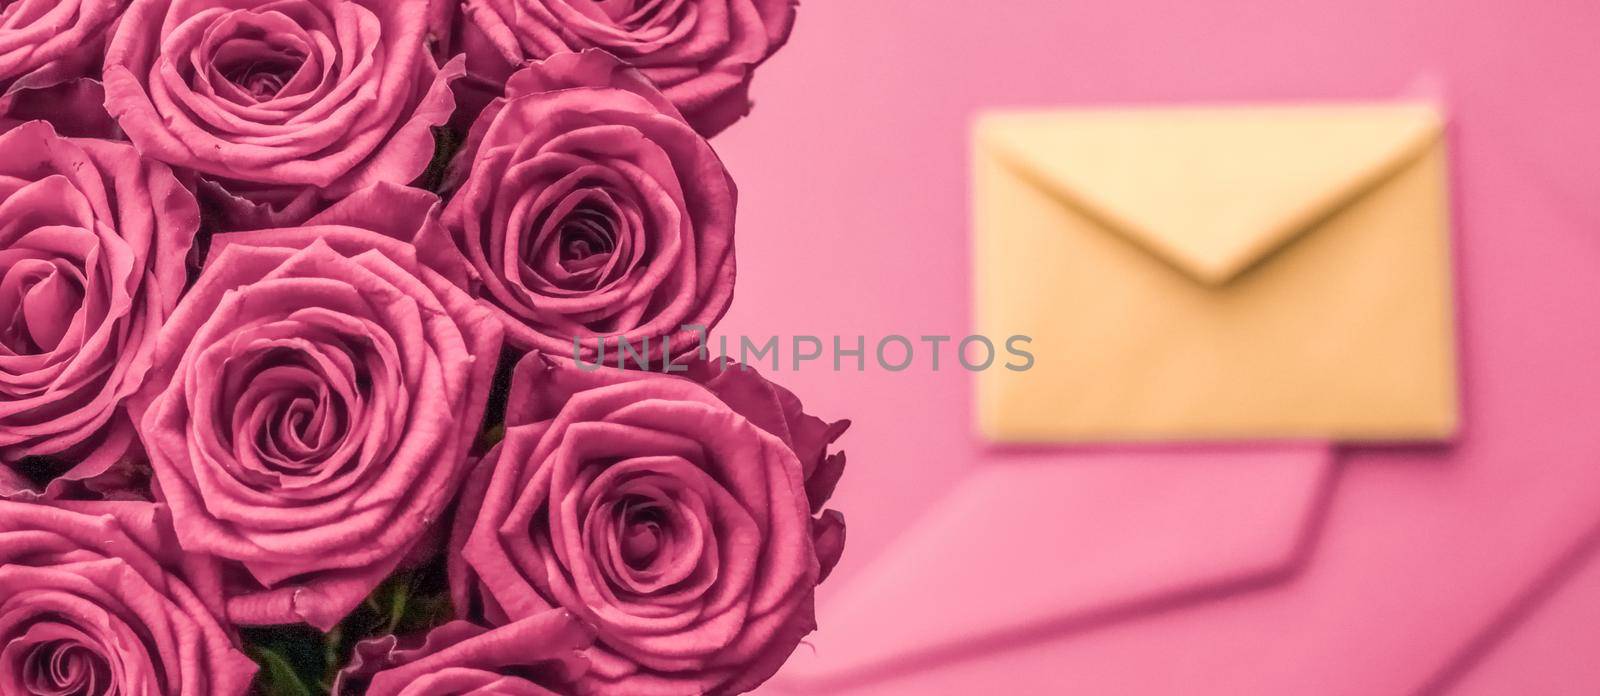 Holiday love letter and flowers delivery, luxury bouquet of roses and card on blush pink background for romantic holiday design by Anneleven